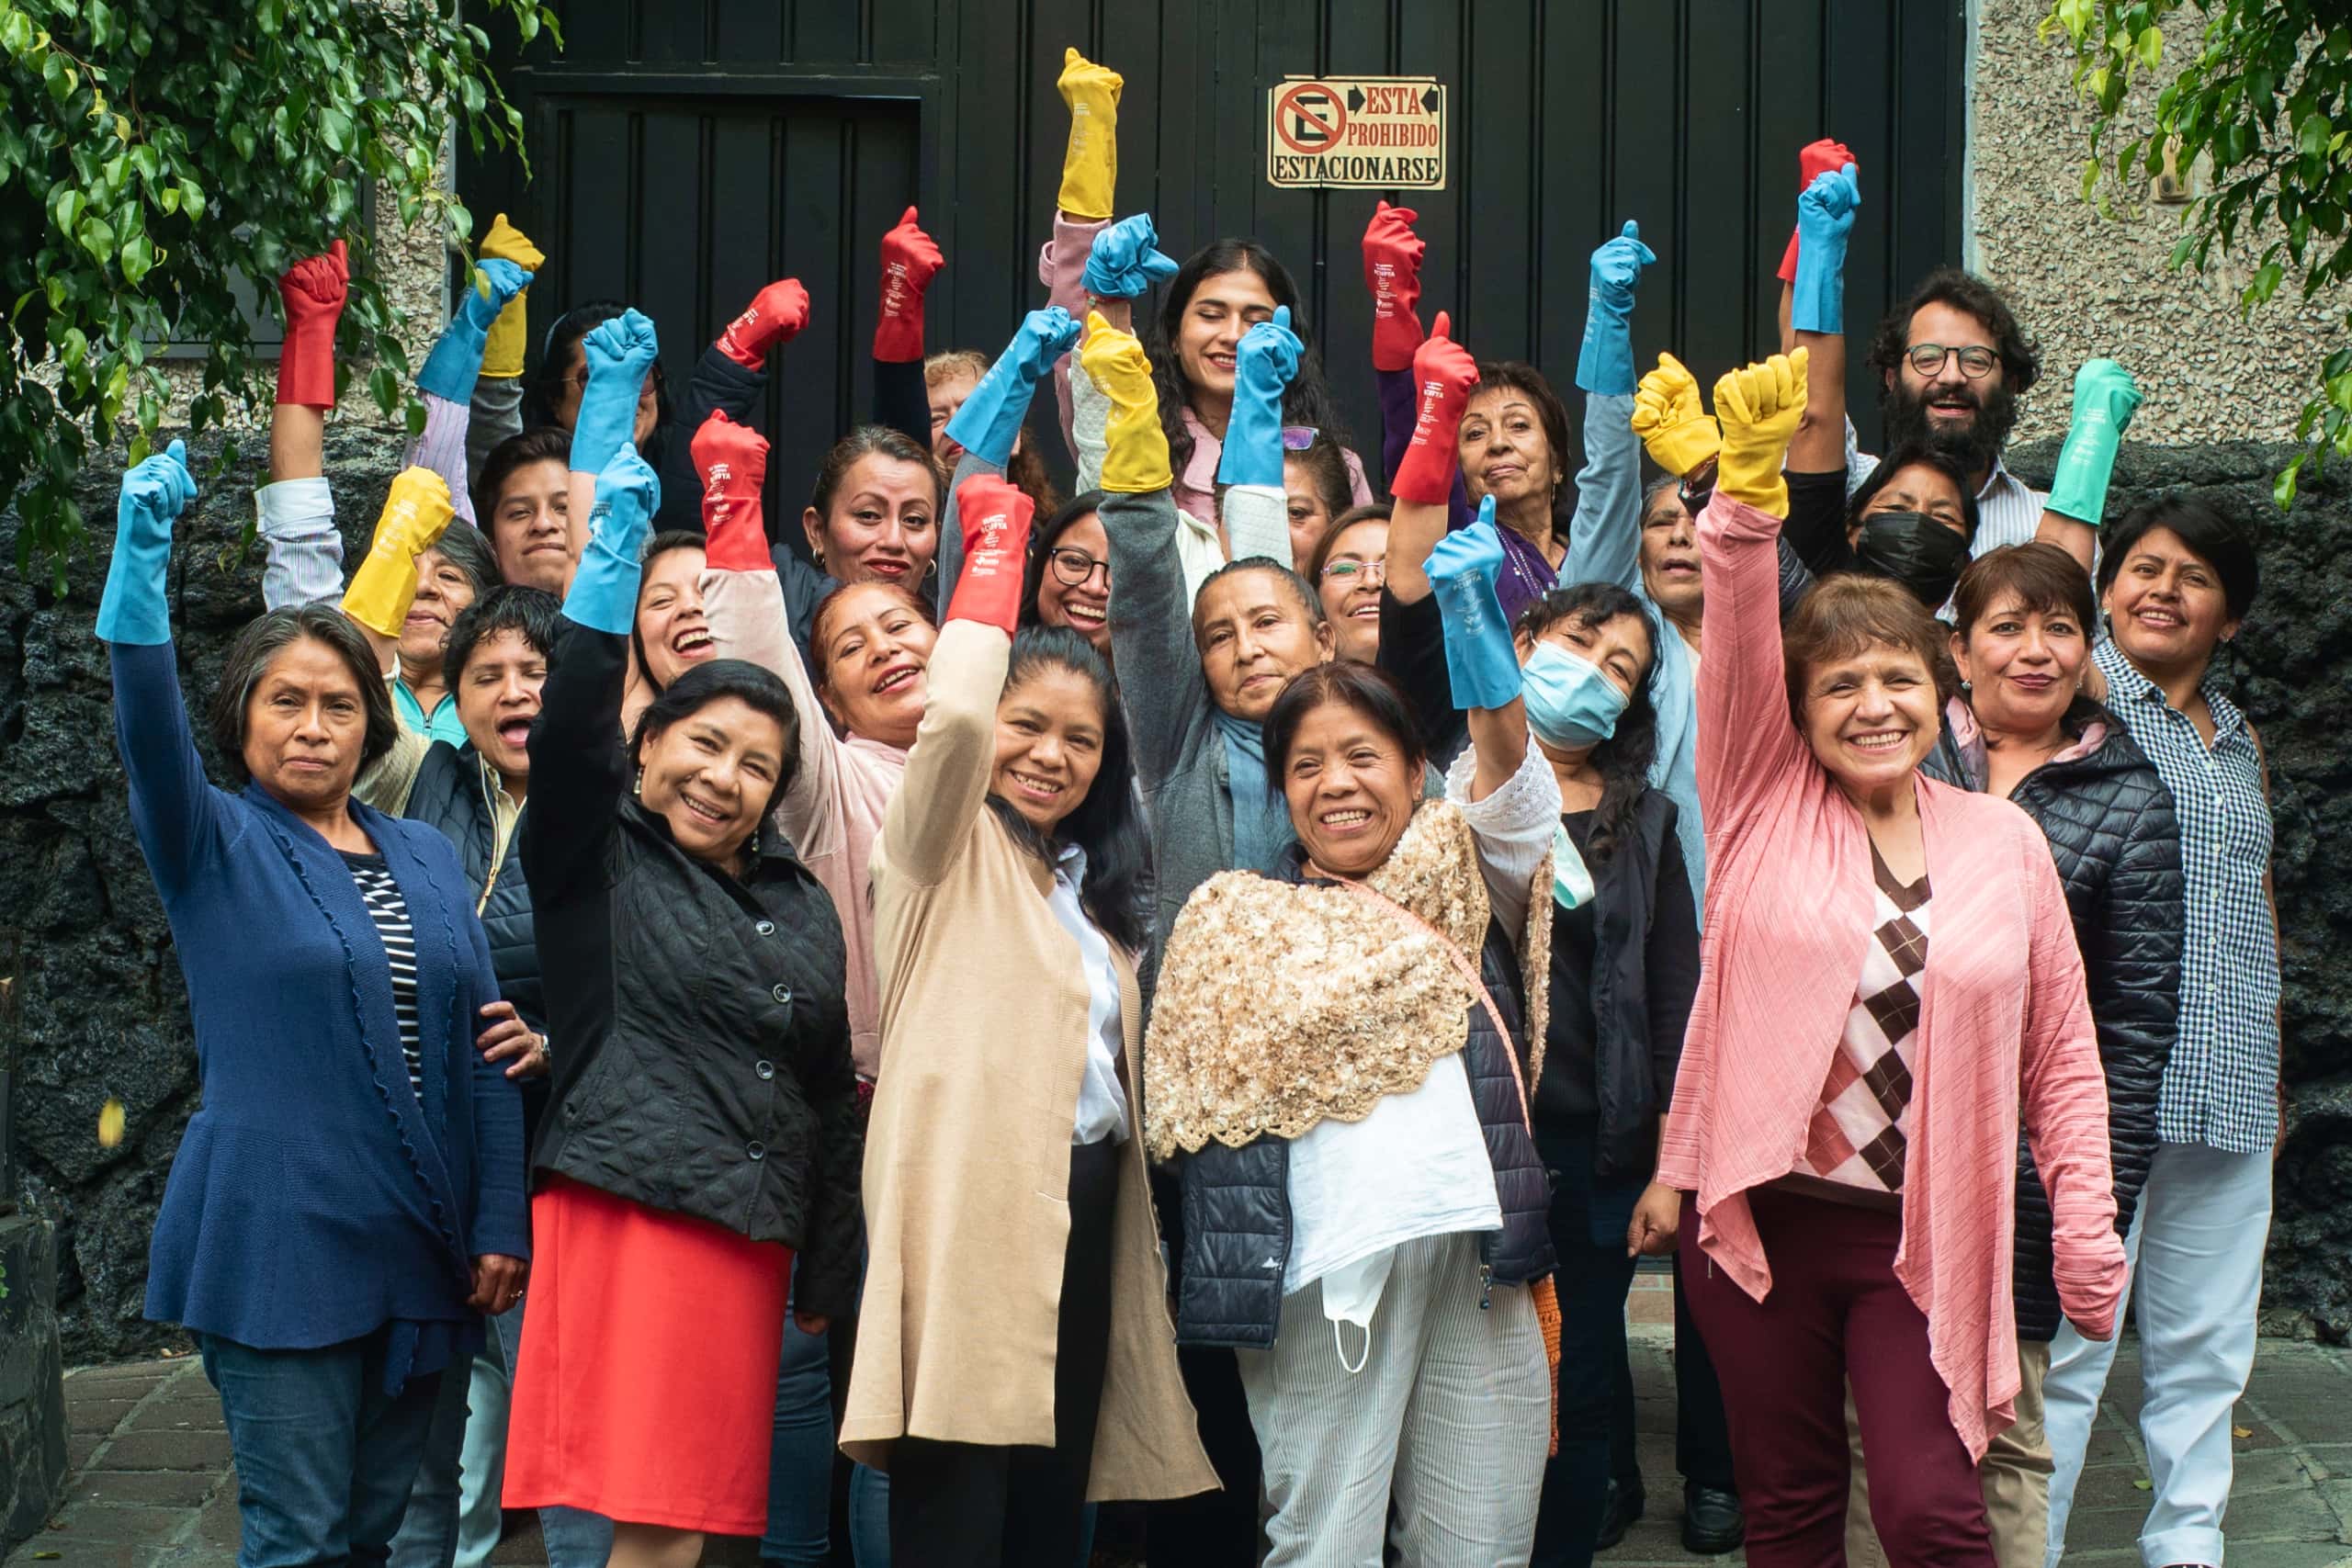 A group of domestic workers in Mexico stand together, wearing colorful dishwashing gloves, arms raised in celebration.